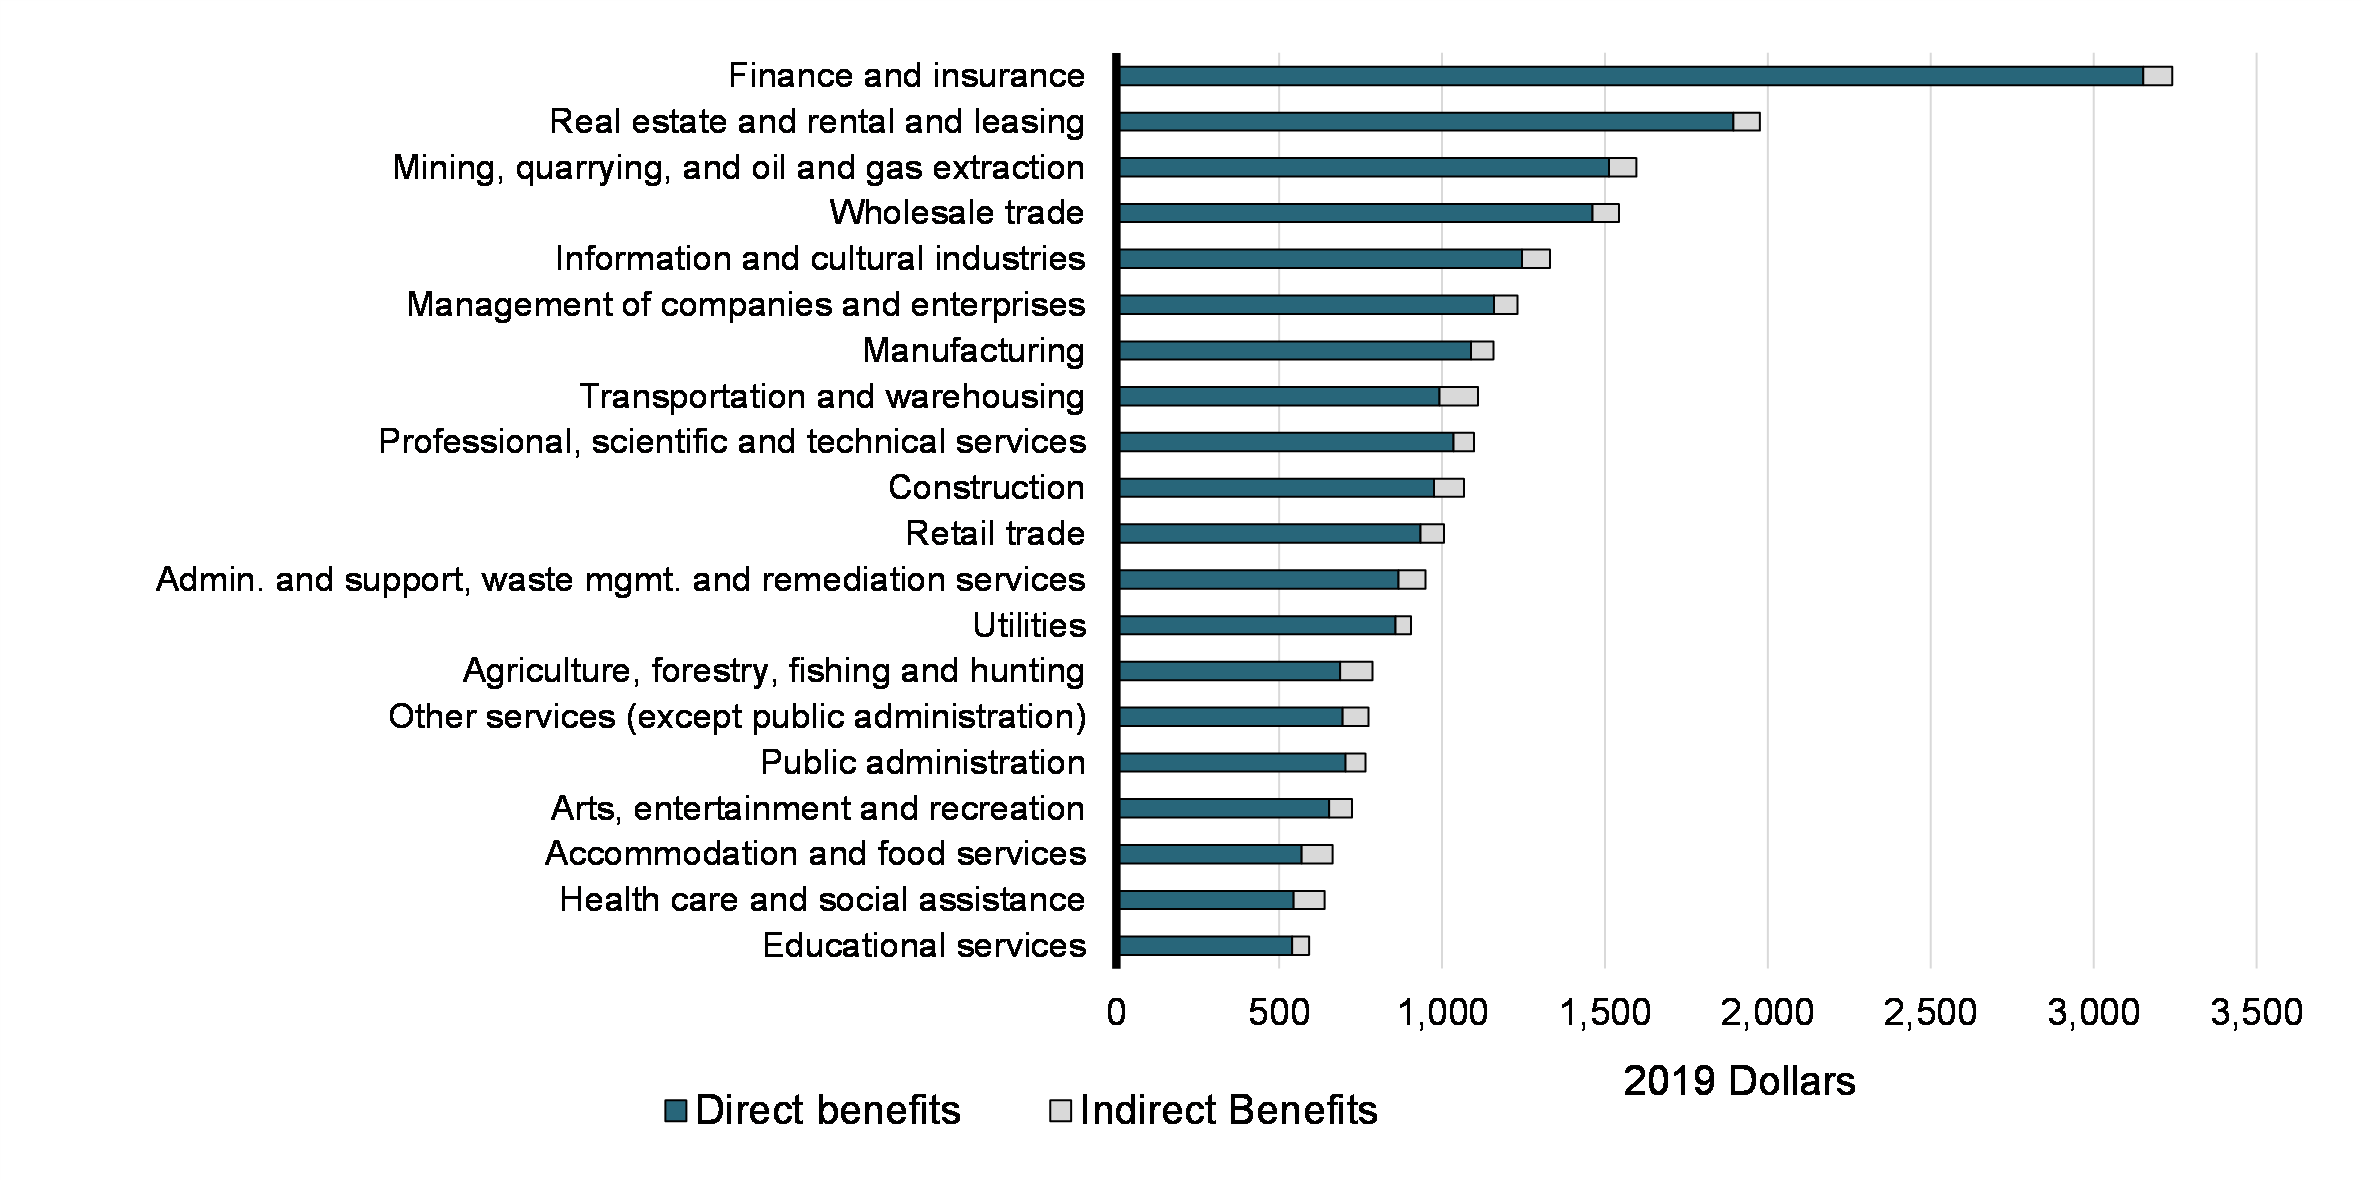  Chart 39: Direct and Indirect Benefits of OEE Deductions, by 2-Digit NAICS Industry (2018), in 2019 Dollars
